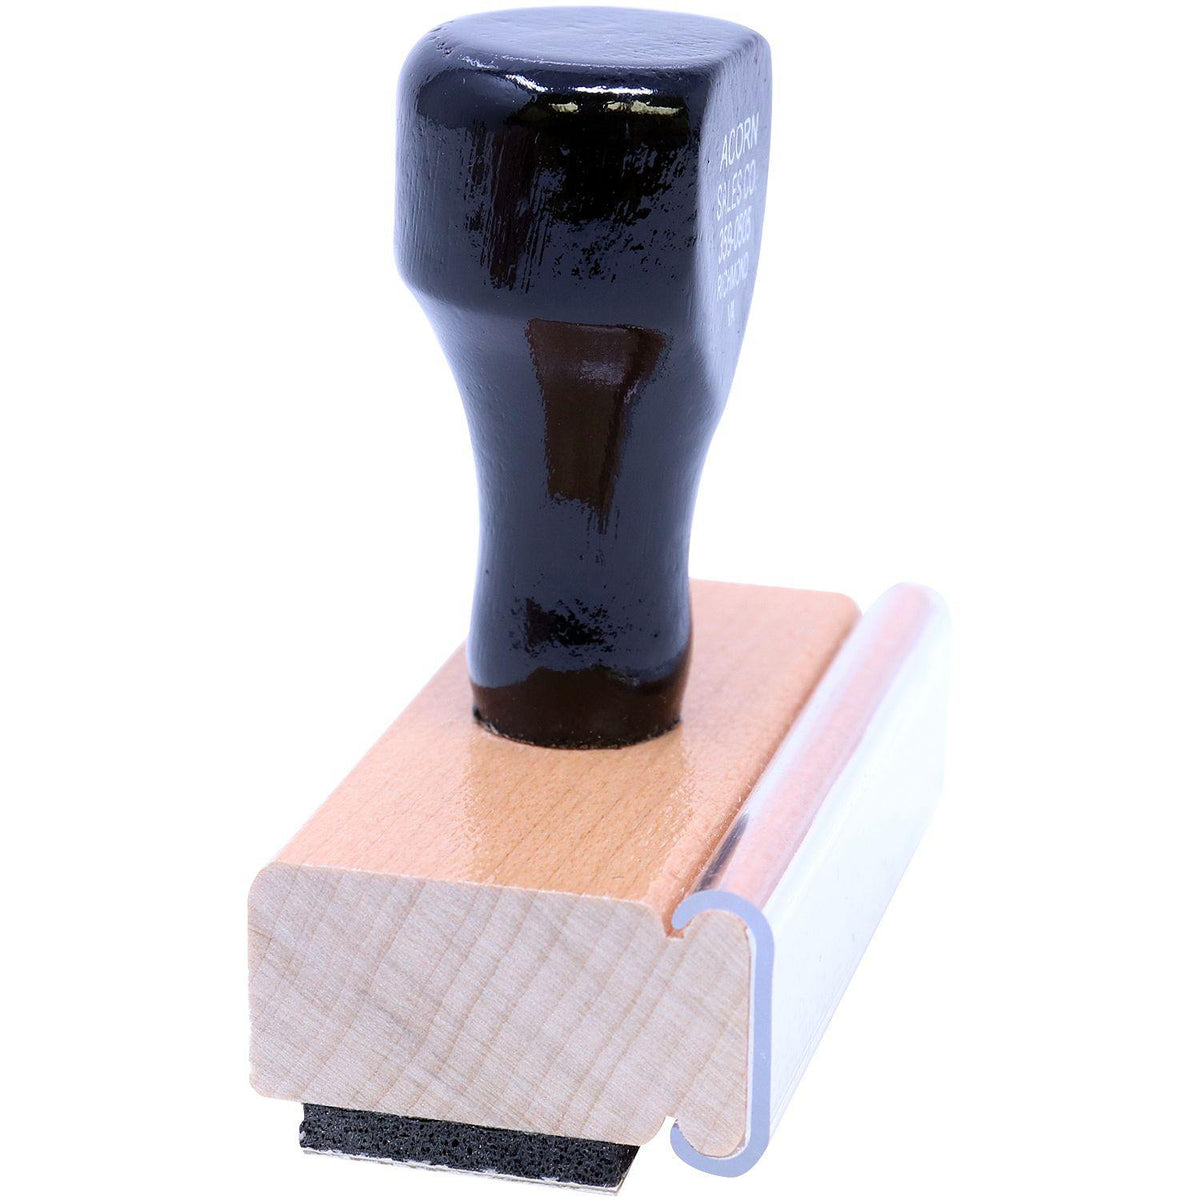 Side View of Large Make Up Work Rubber Stamp at an Angle